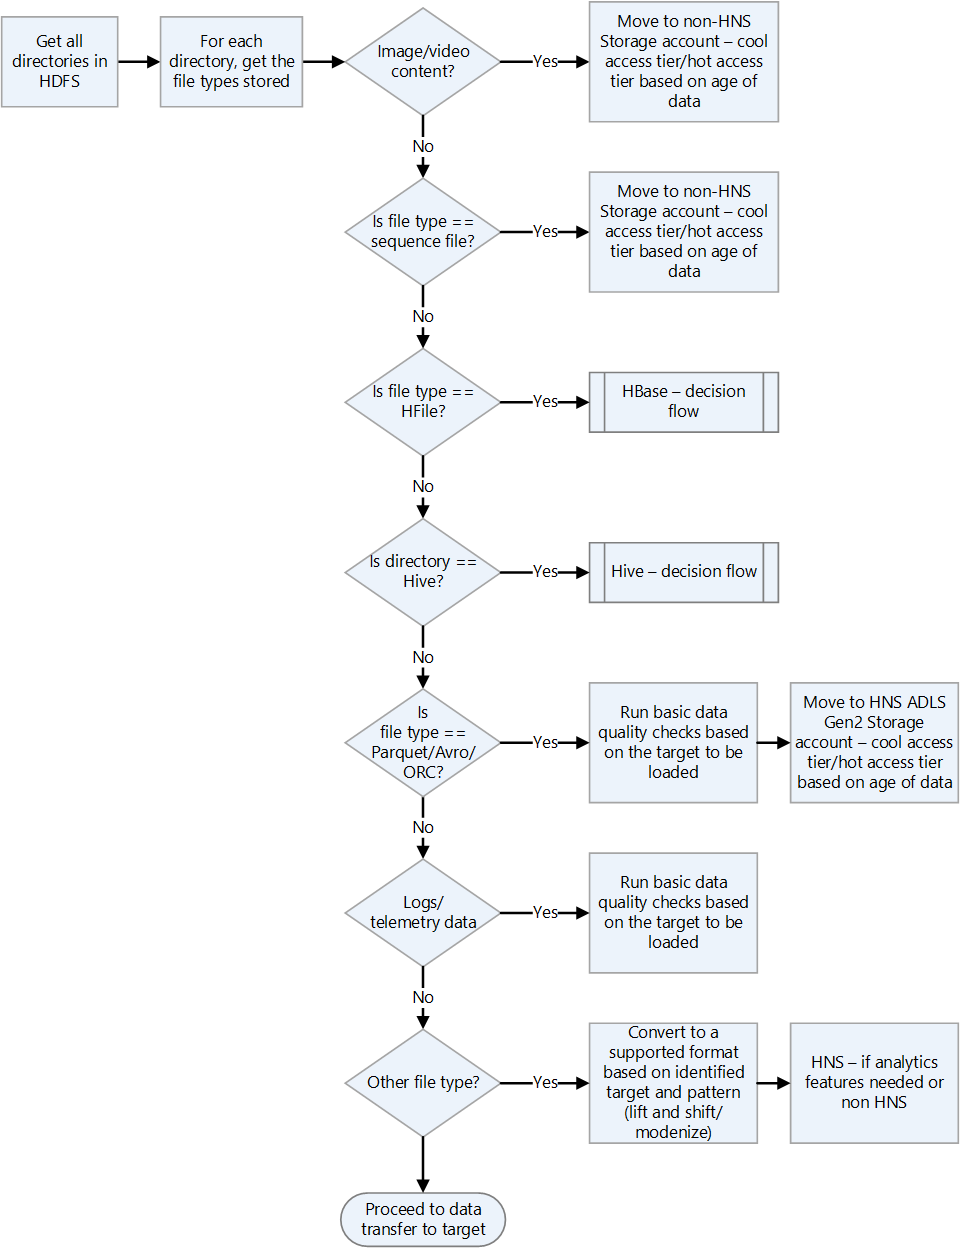 Diagram that shows a decision flowchart for handling the various file types.